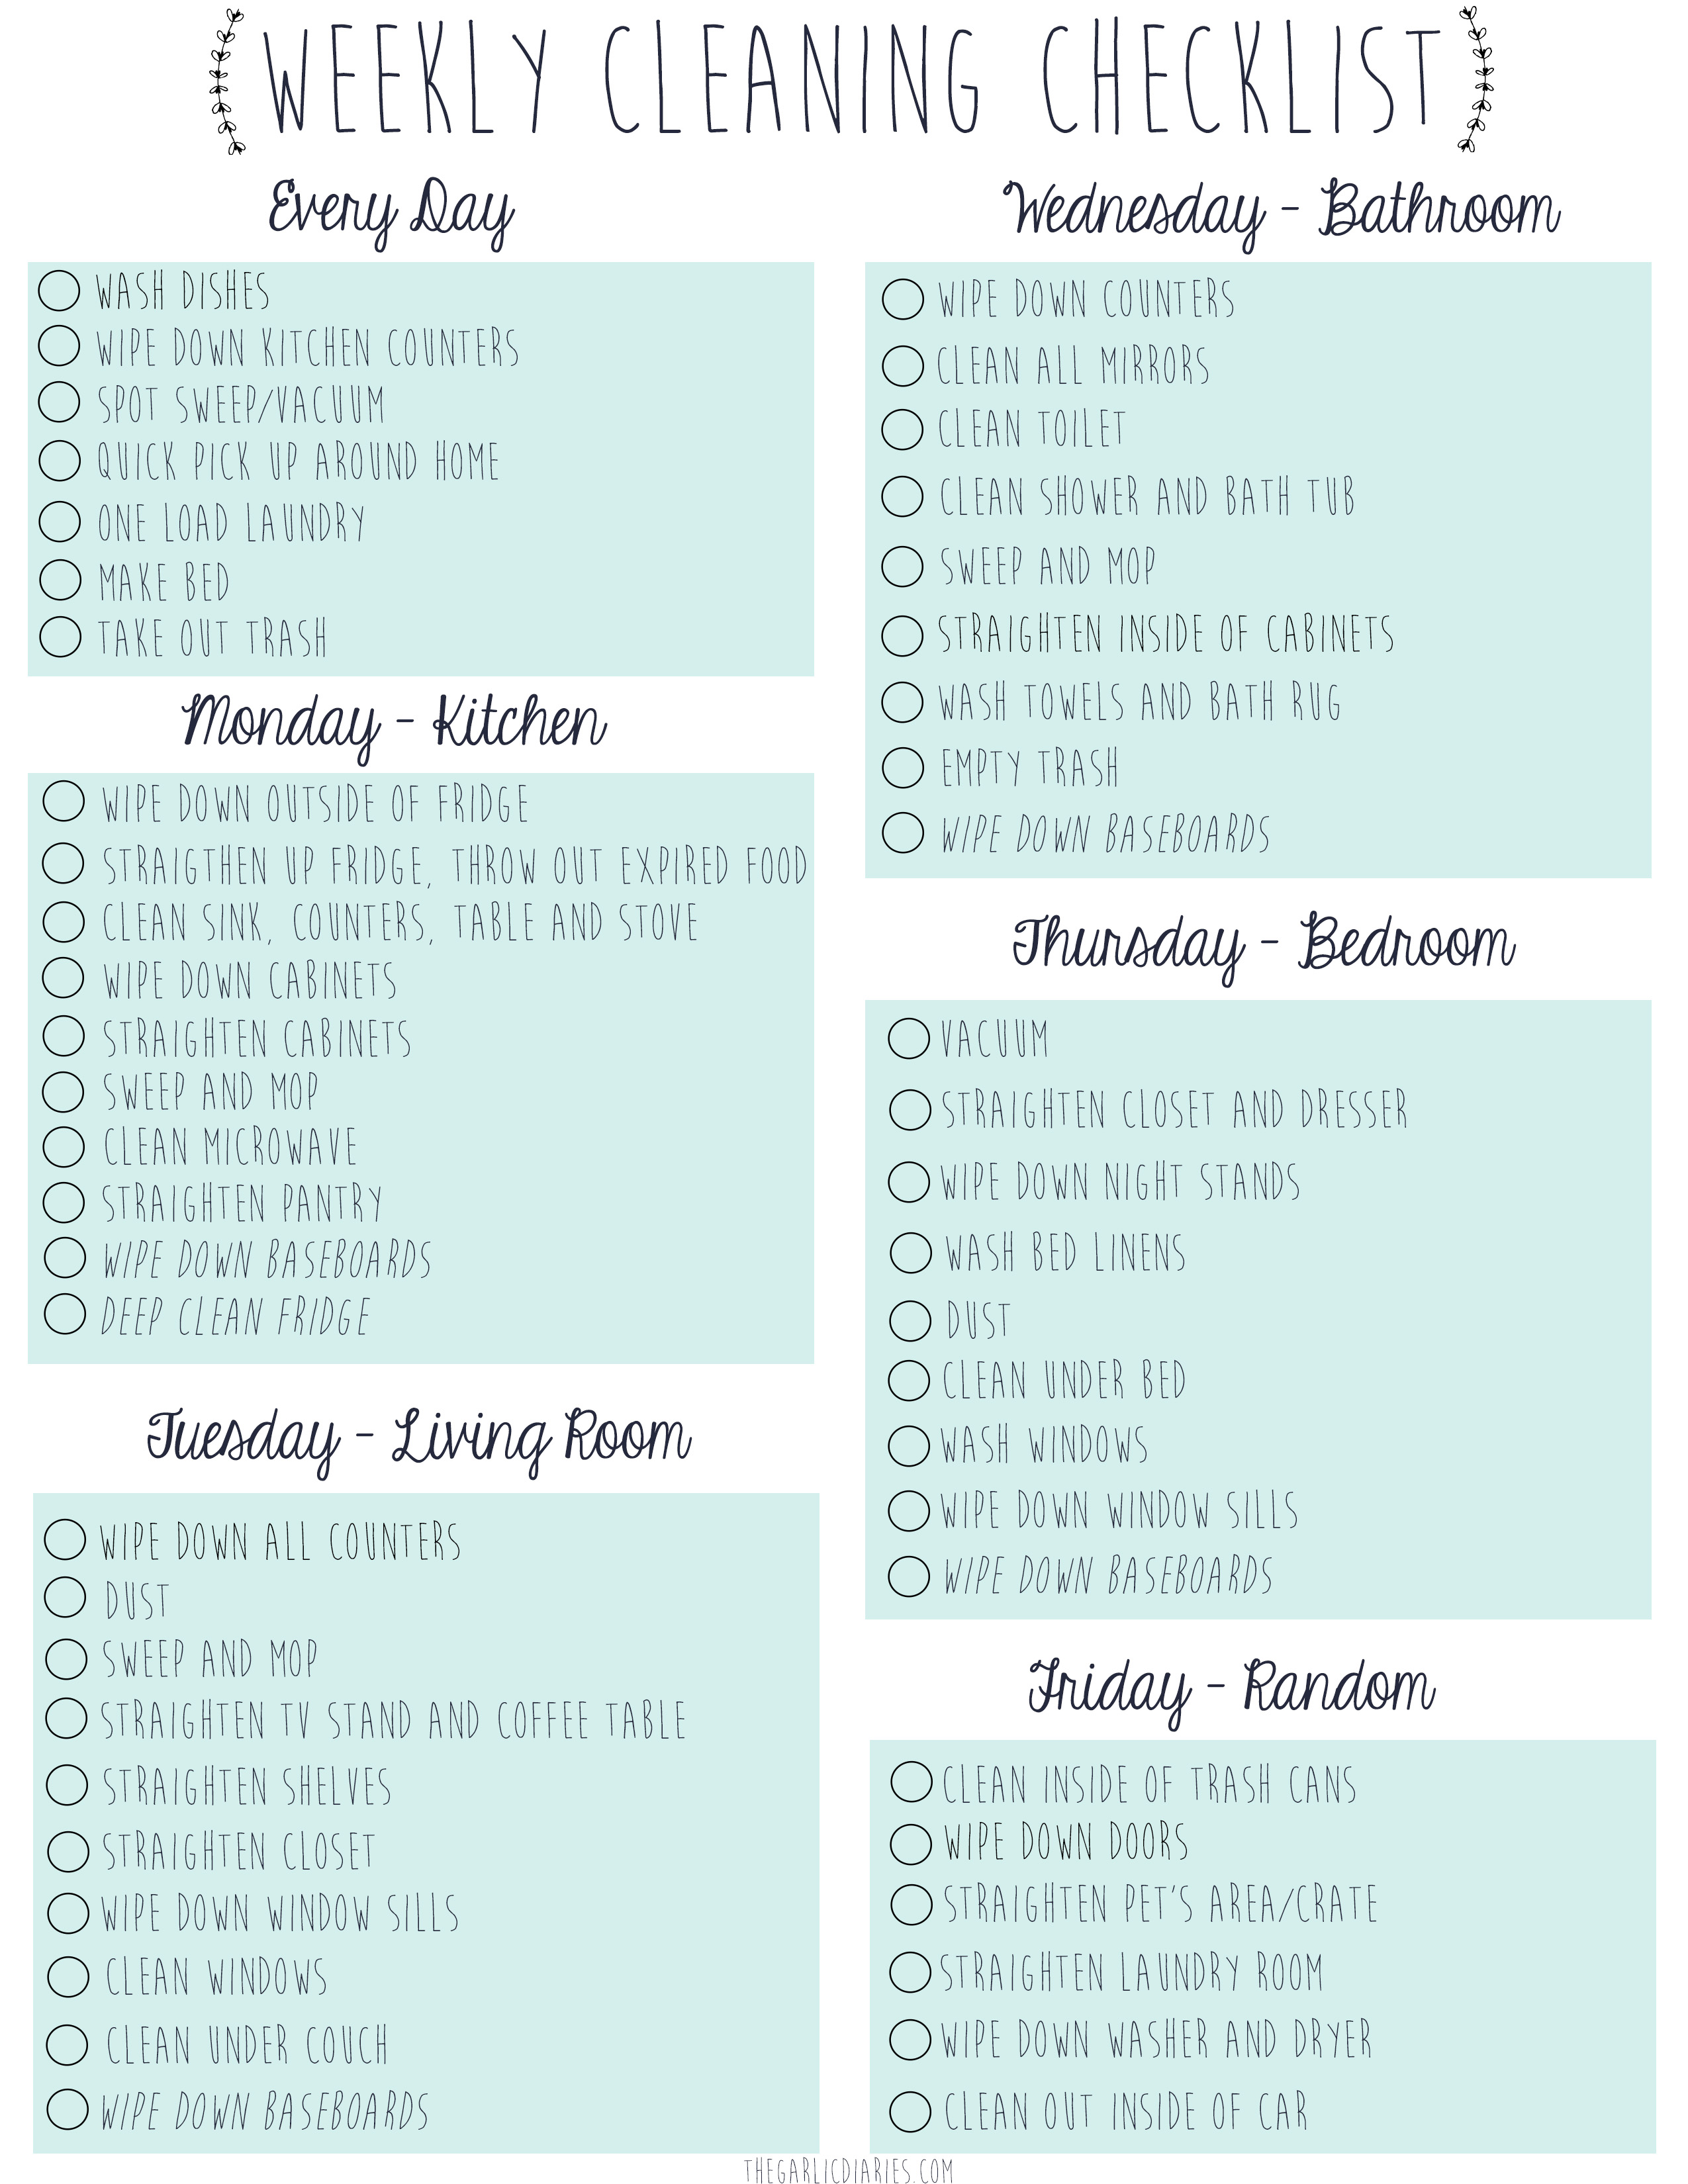 focus-cleaning-checklist-cleaning-checklist-printable-home-cleaning